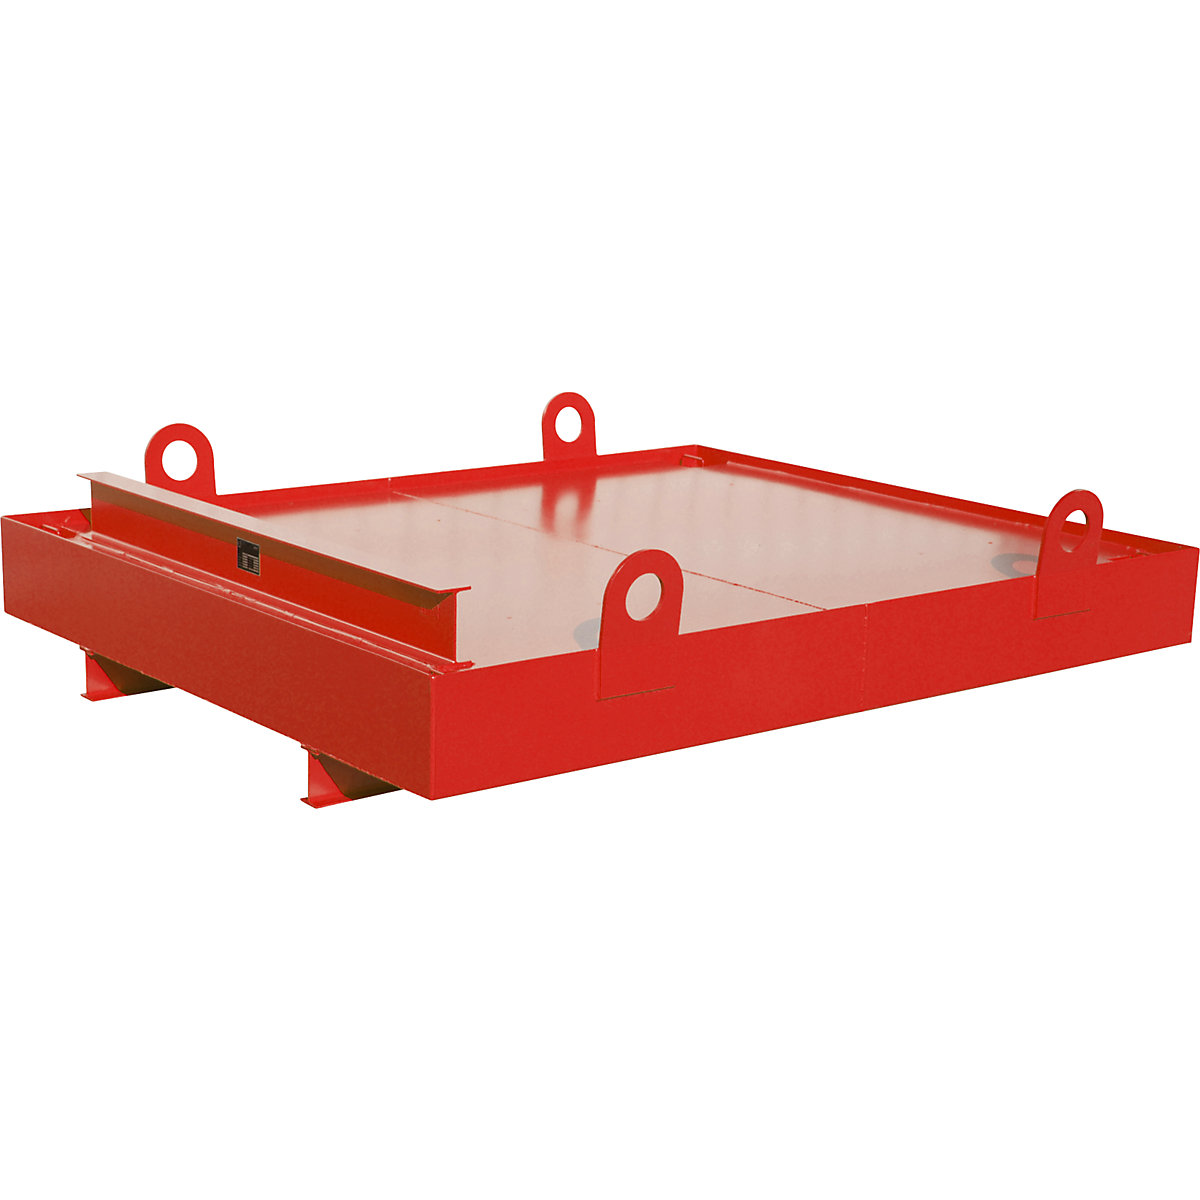 Sump tray for skip trailer – eurokraft pro, for skip trailers, sump capacity 880 l, red-13